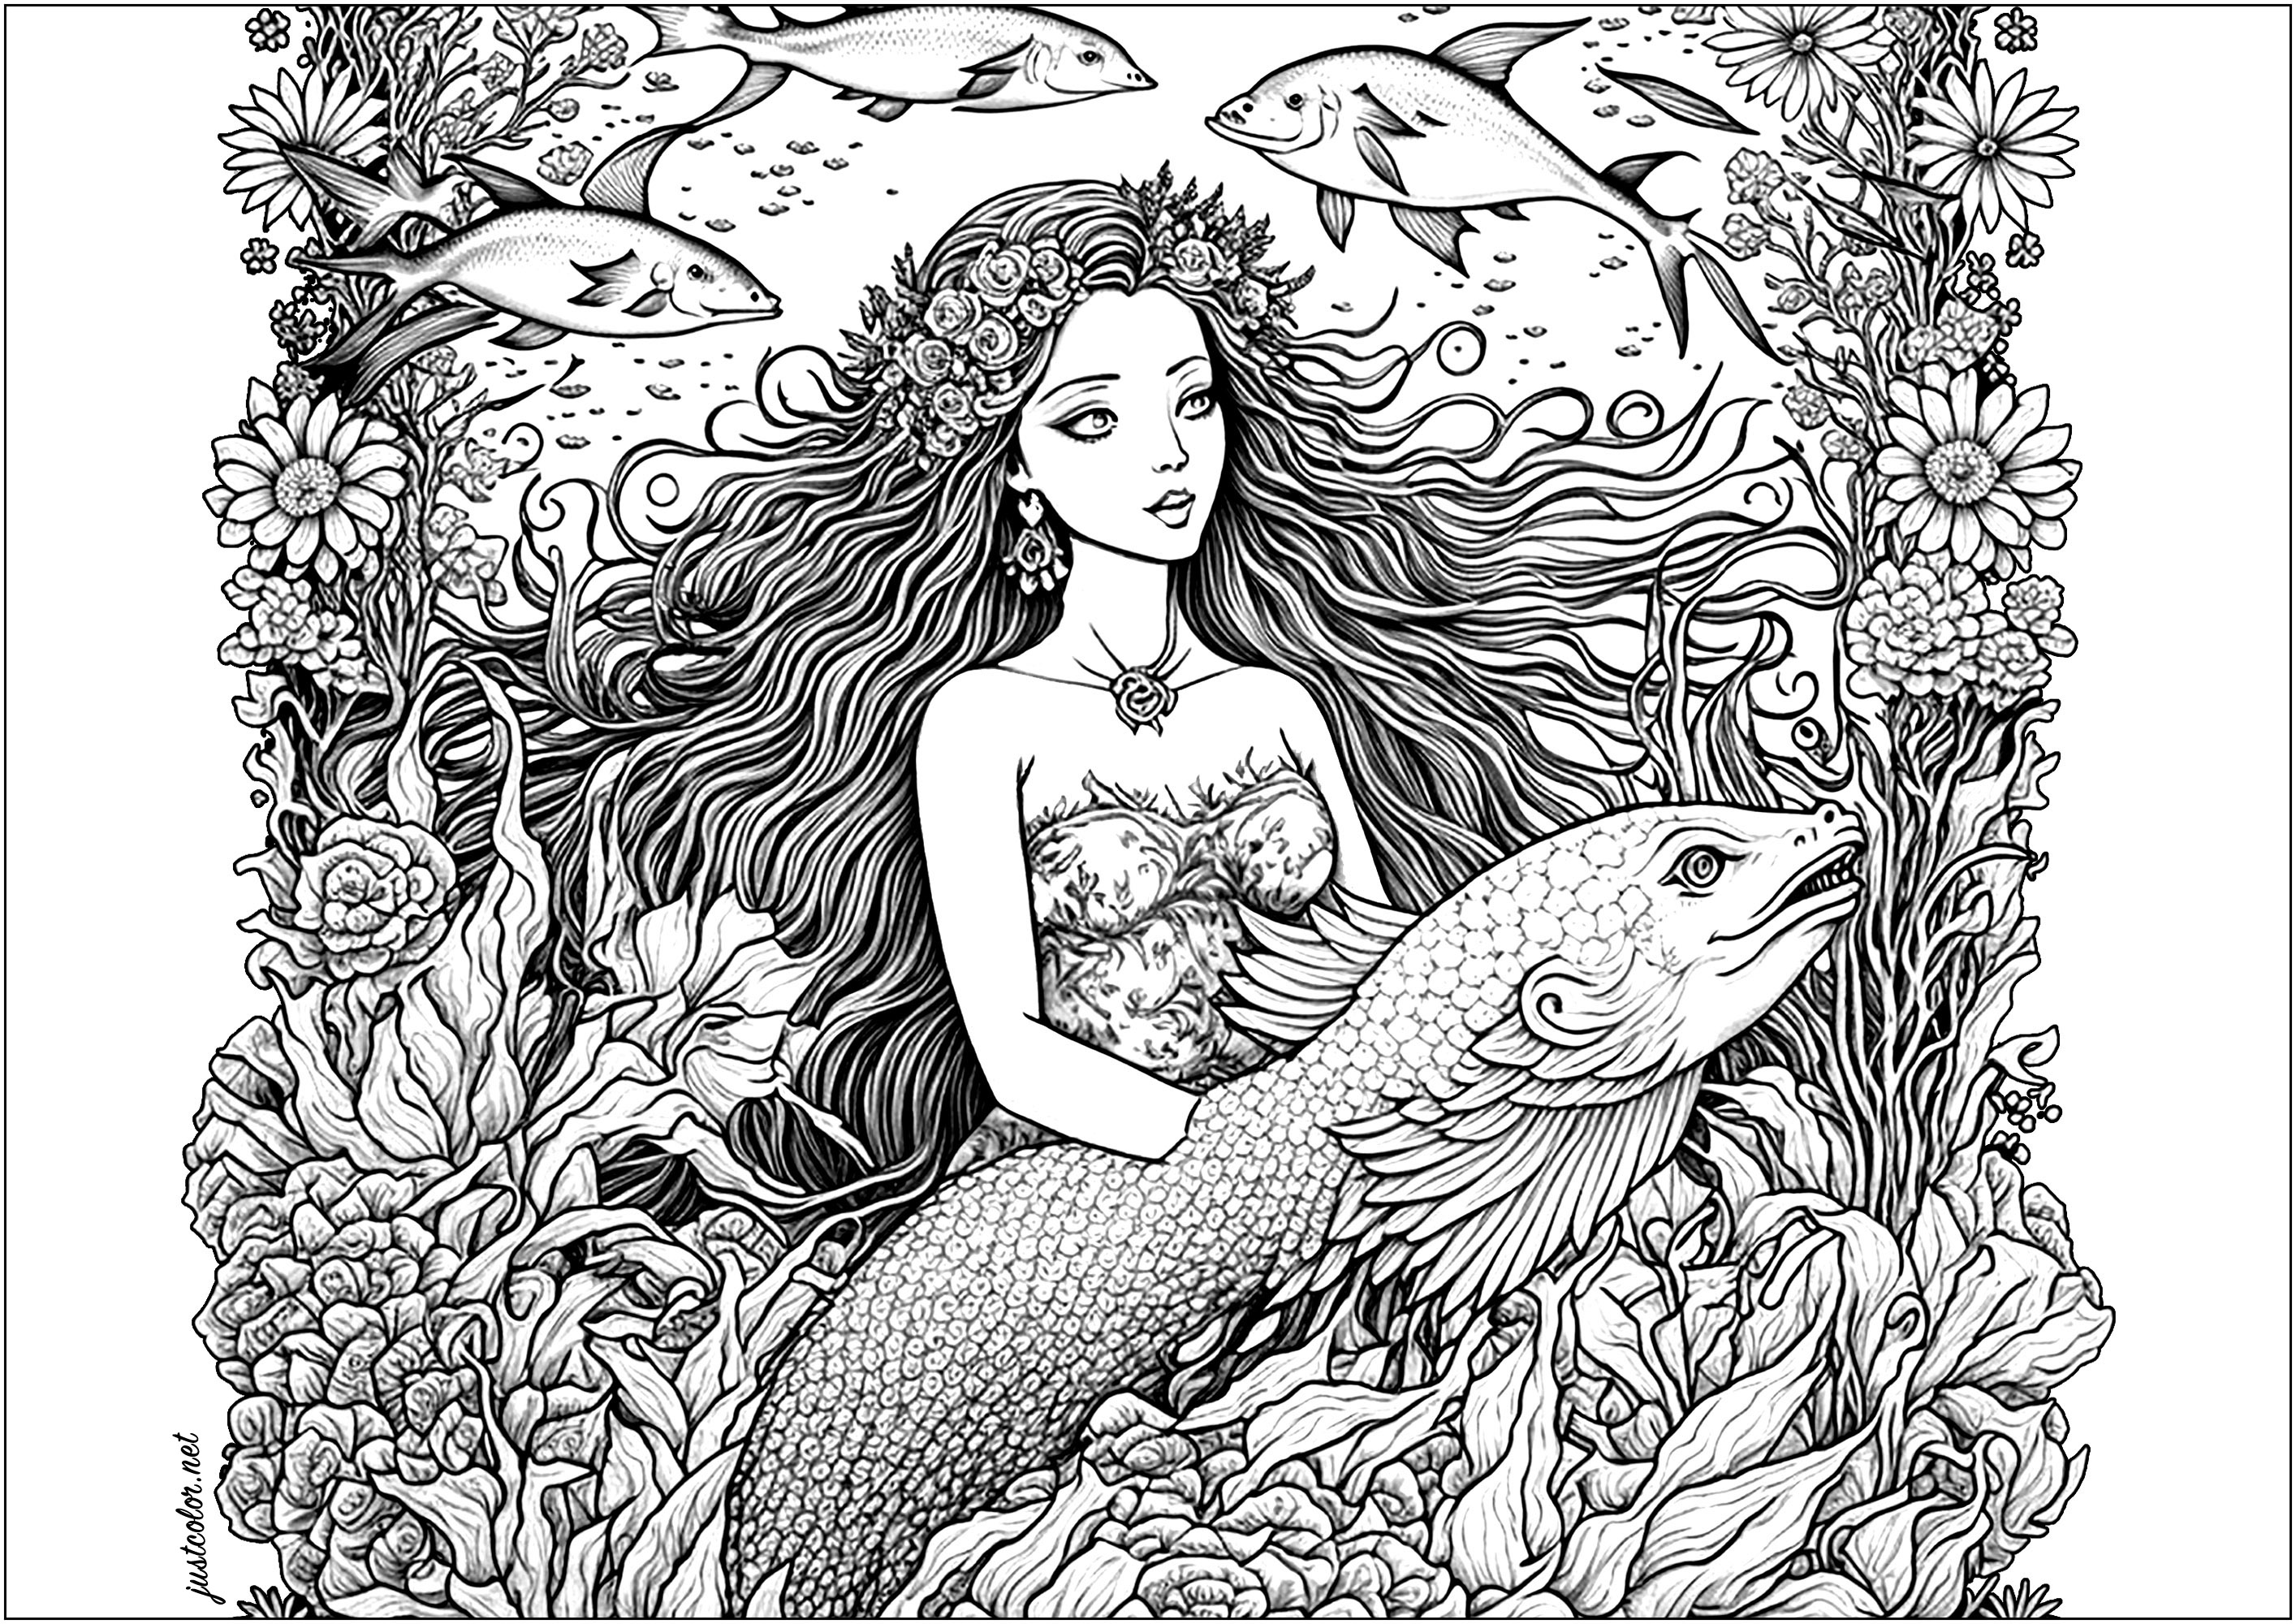 A mermaid gracefully swam through the ocean, with a big fish. She is beautiful, her long hair flowing behind her, with her fish friend swimming by her side. Together they explored the depths of the sea, discovering new and exciting things.